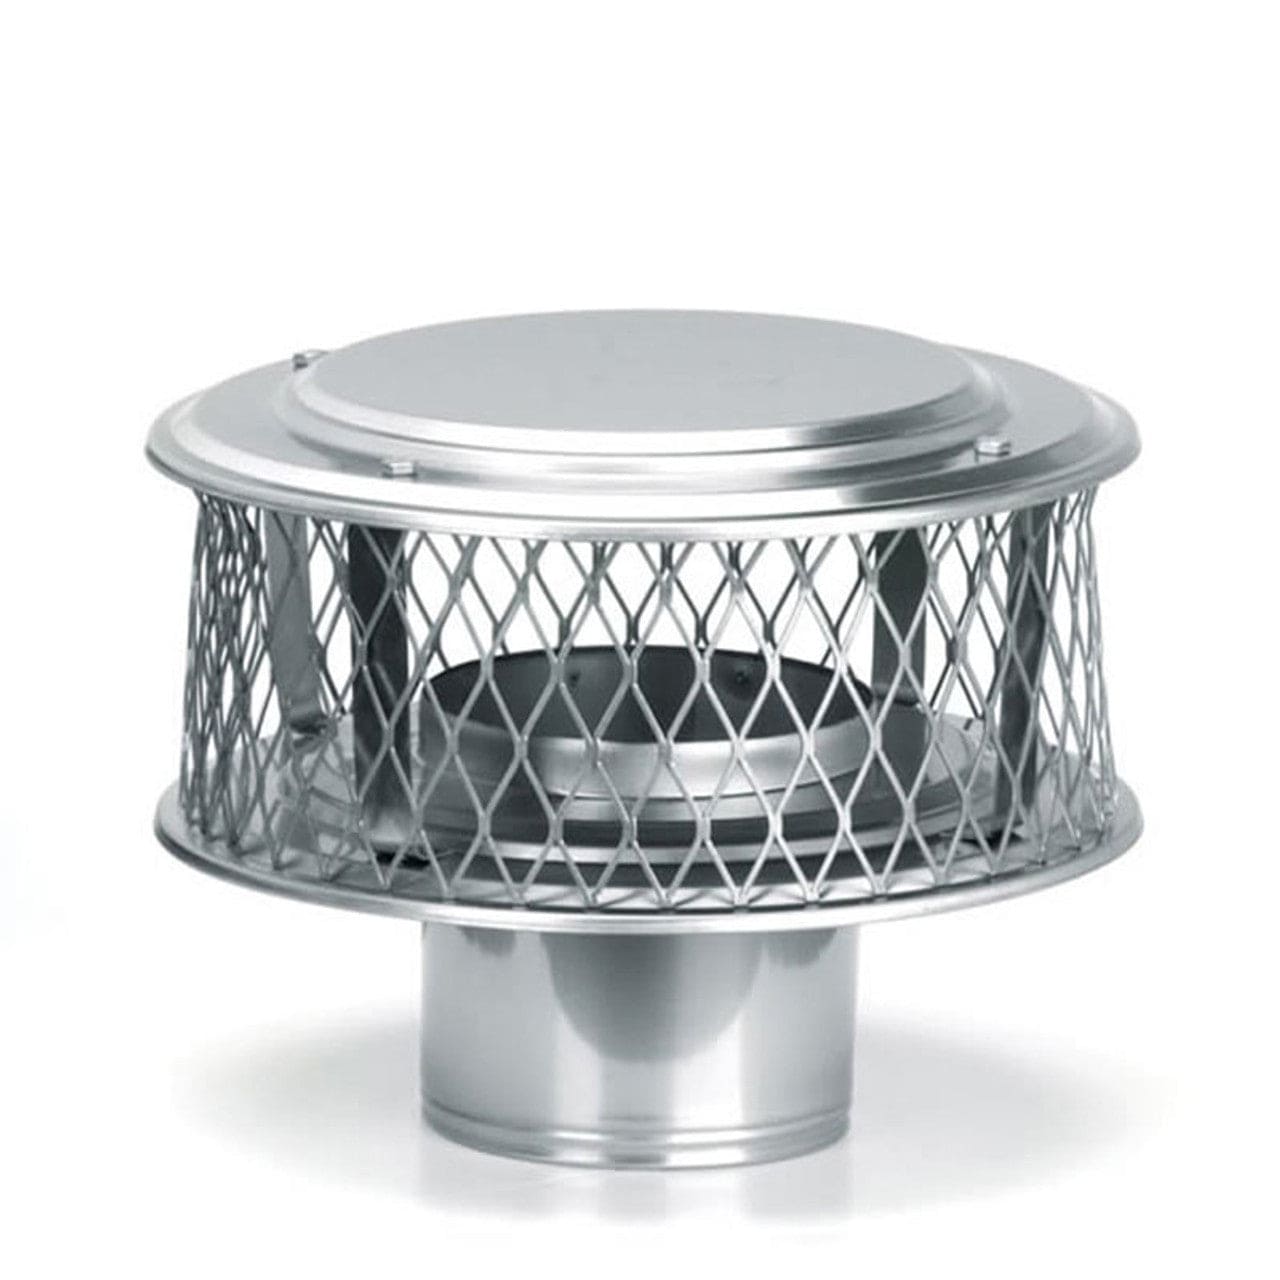 12" HomeSaver 304-Alloy Stainless Steel Guardian Cap with 3/4" Mesh - Chimney Cricket